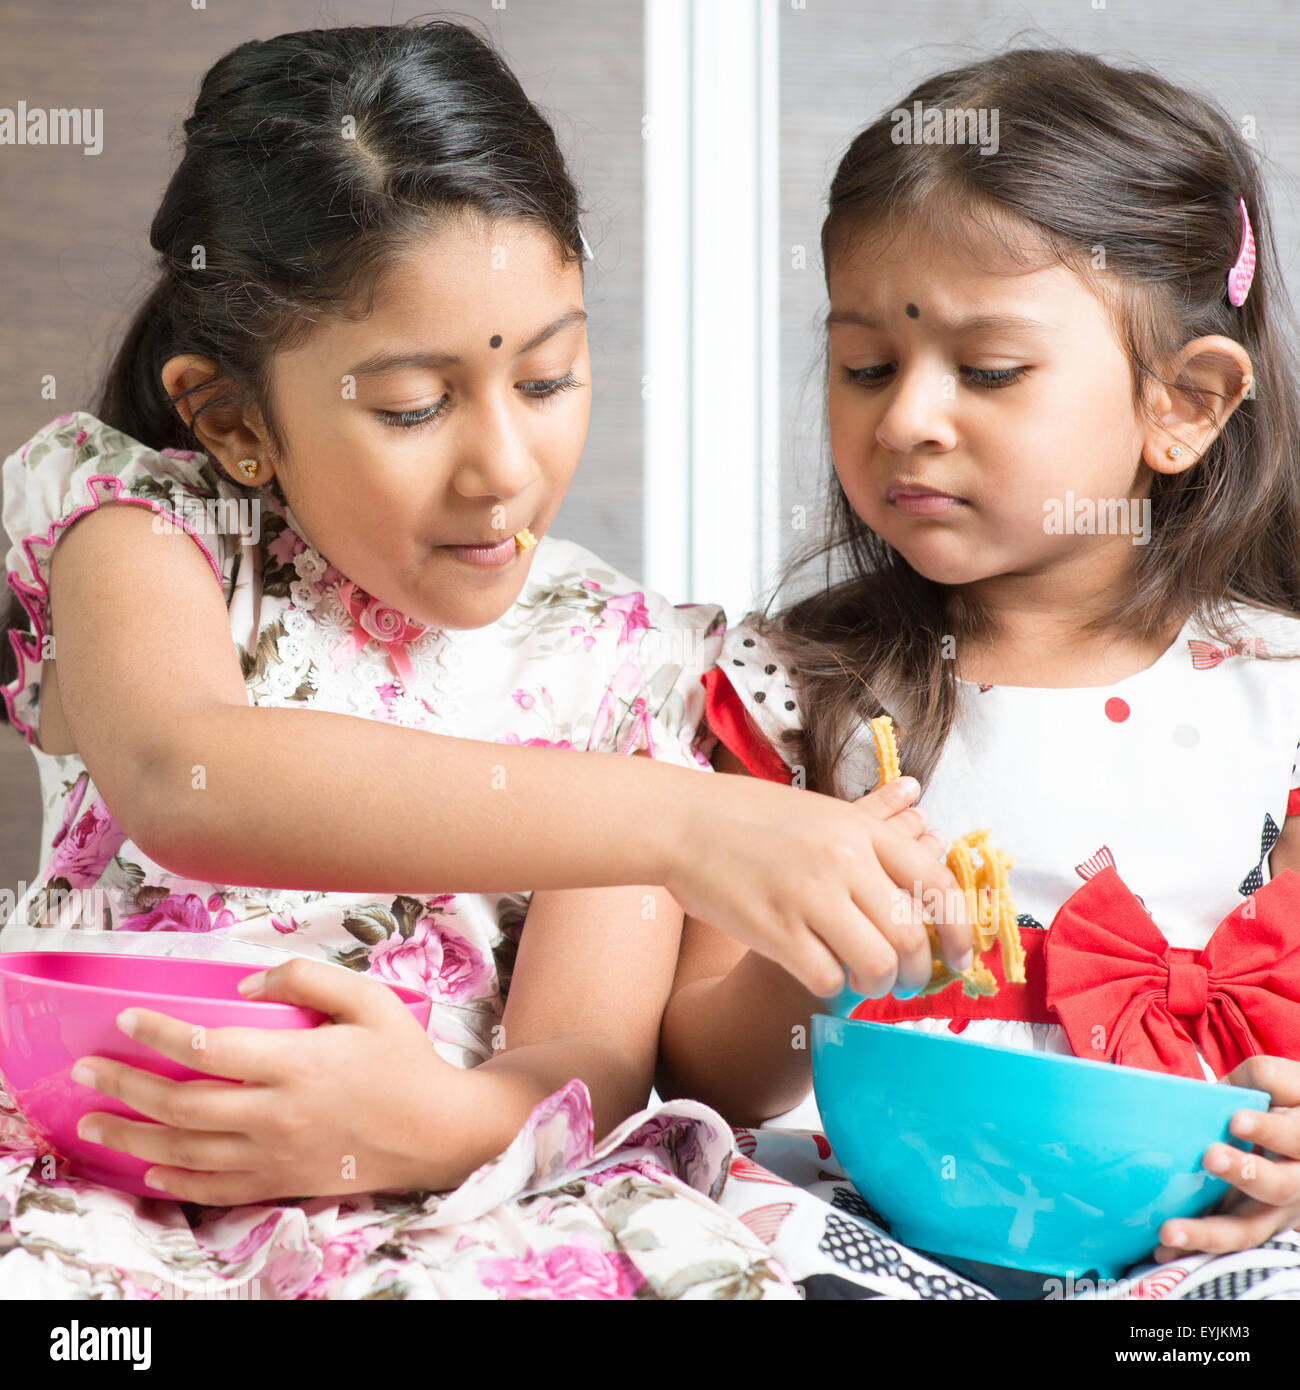 Indian girls sharing food, traditional snack murukku with each other. Asian sibling or children living lifestyle at home. Stock Photo